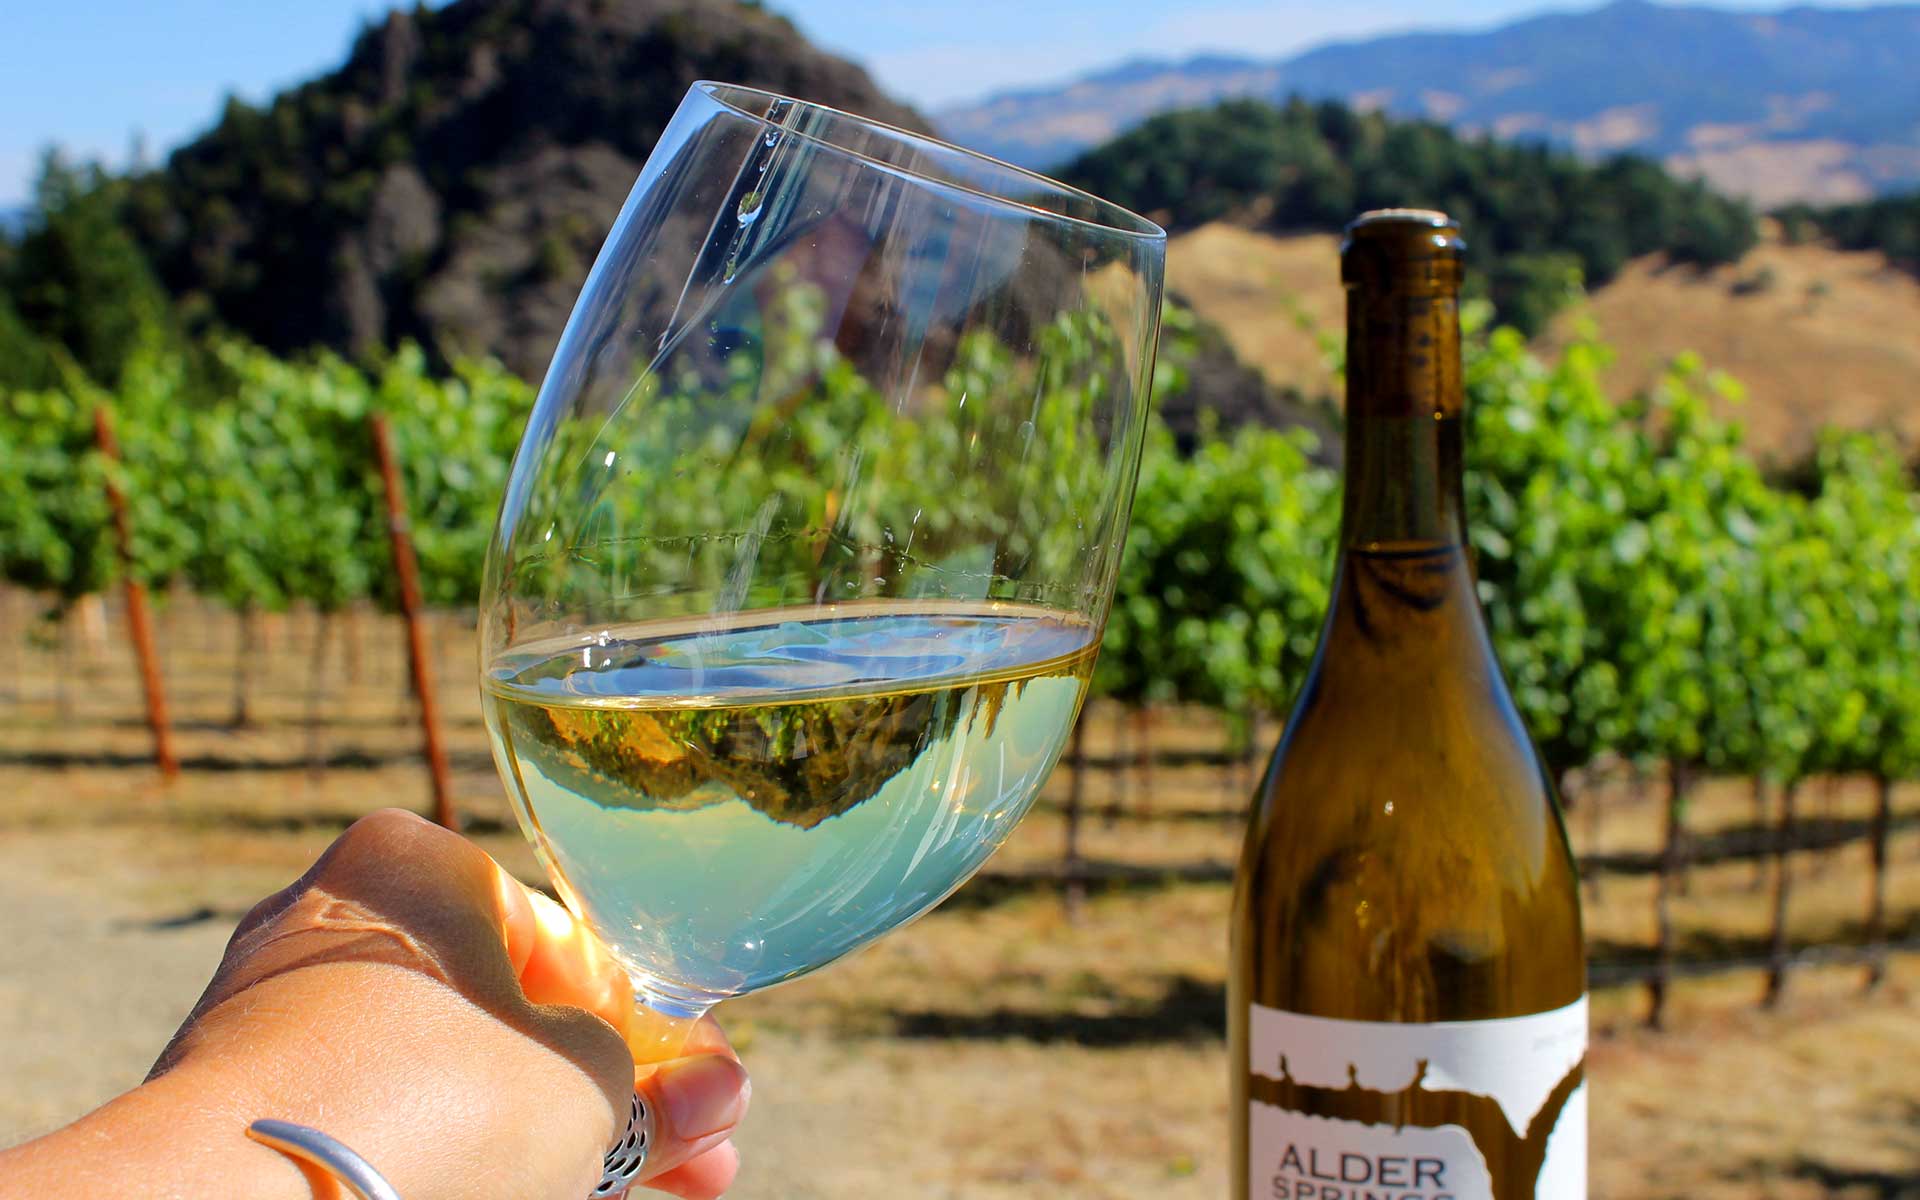 The Taste Of Alder Springs: Cheers with a glass of Alder Springs Chardonnay